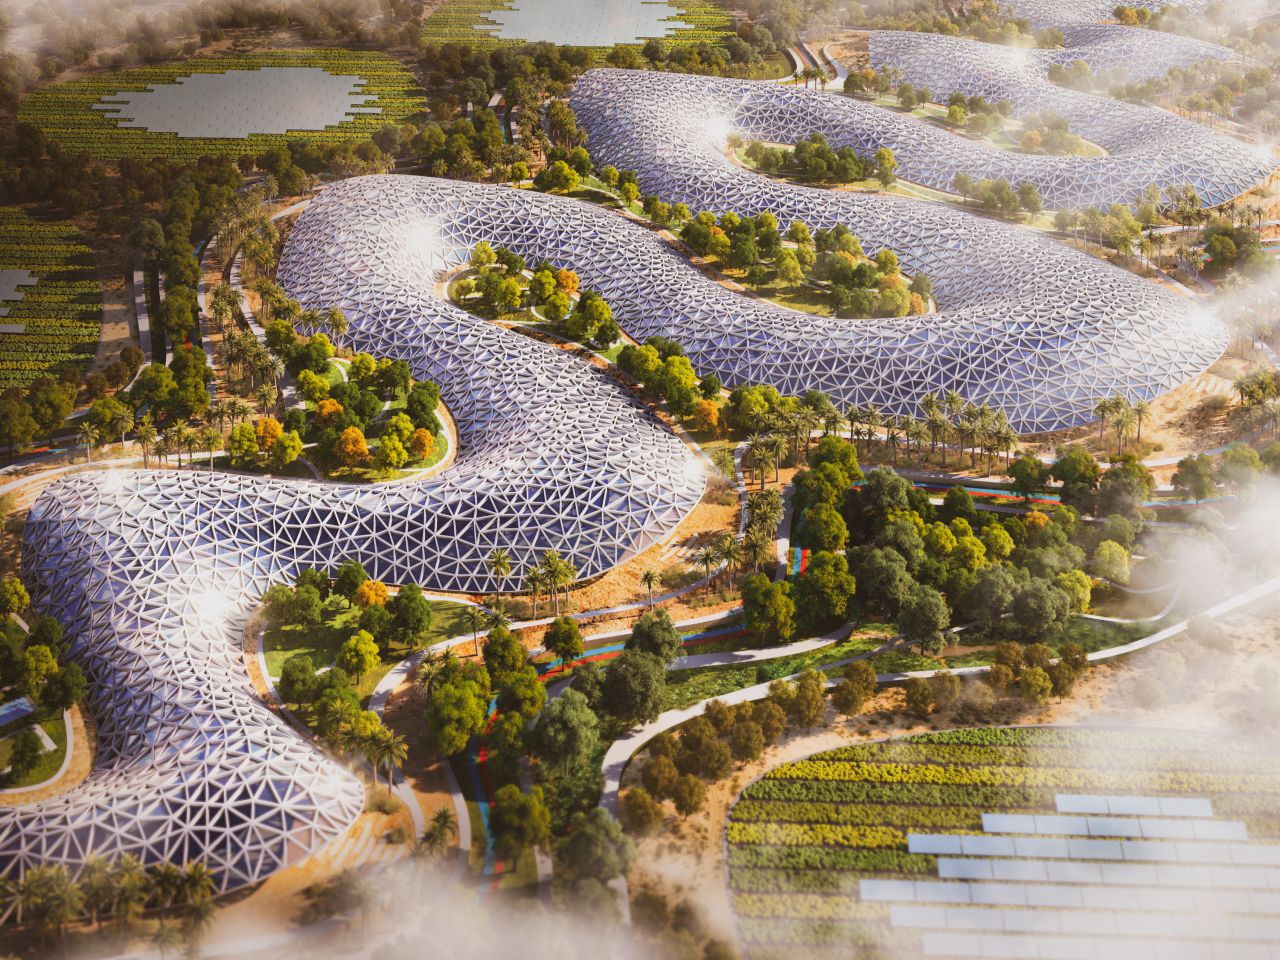 Separate from The Loop is another environmentally conscious design proposed by URB, known as the "Agri Hub." Pictured in this rendering, the project would be a center for sustainable agriculture and tourism in the desert outside of the city of Dubai.